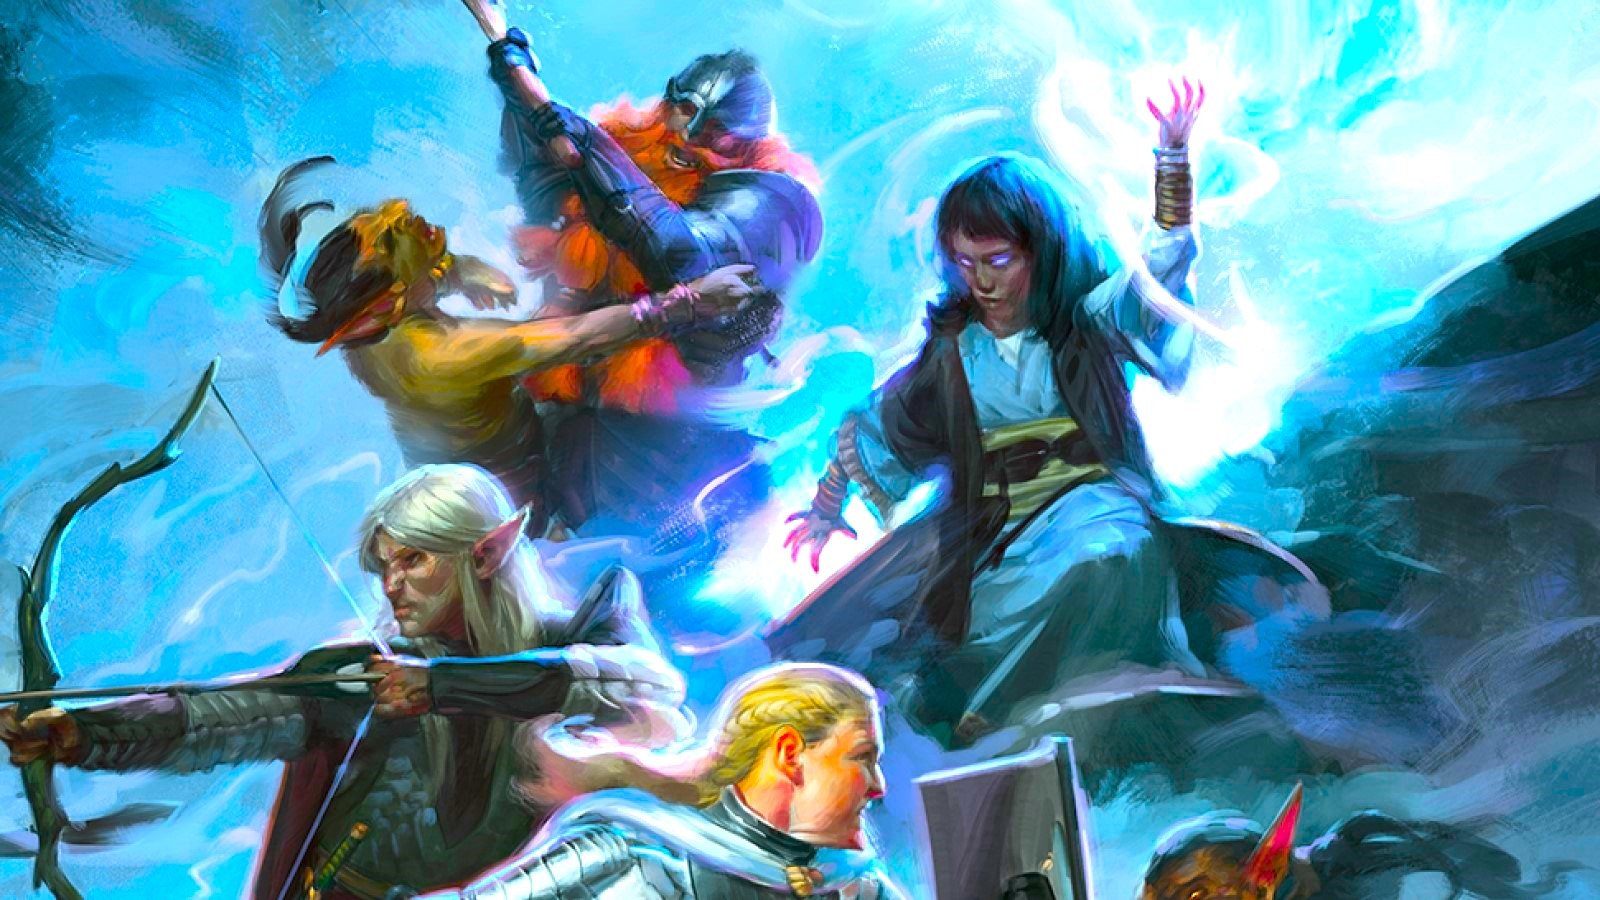 DnD how to be a DM - a party of adventurers battling with magic and medieval weapons (art by Wizards of the Coast)